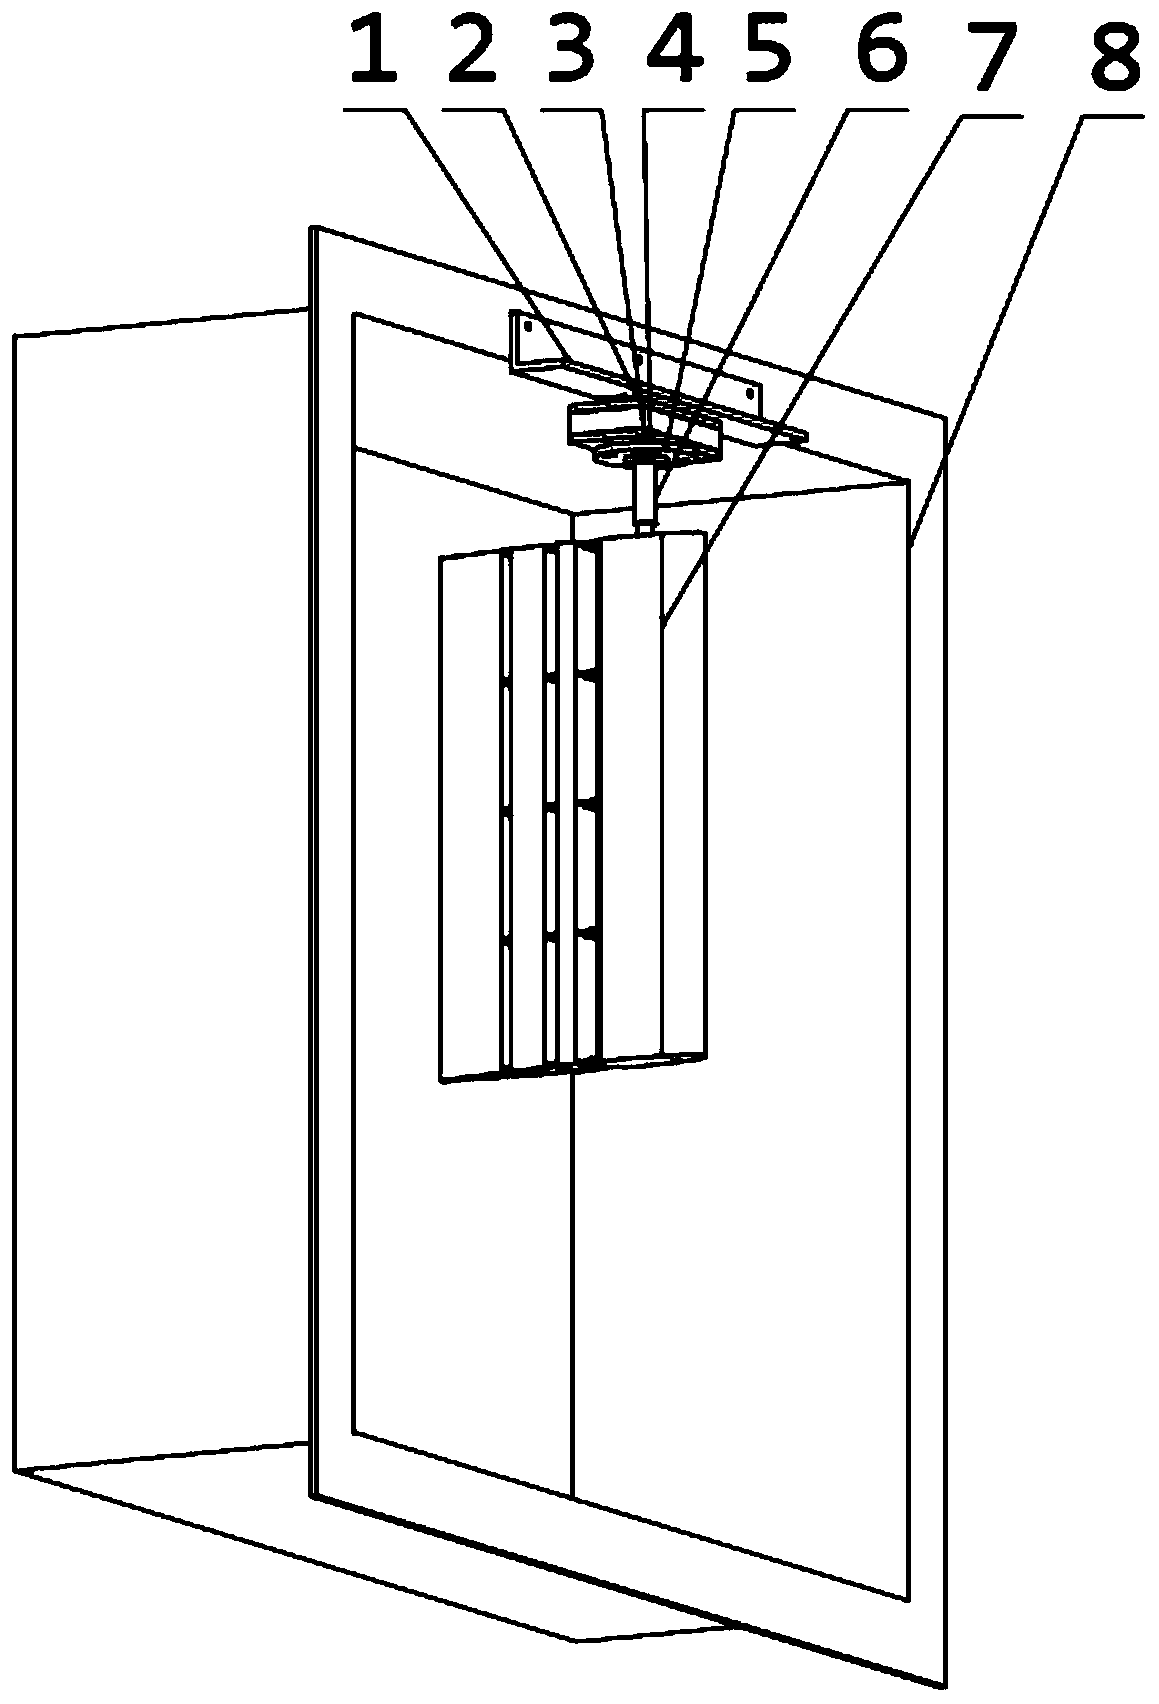 Wind tunnel testing device for deformable wing with adjustable attack angle